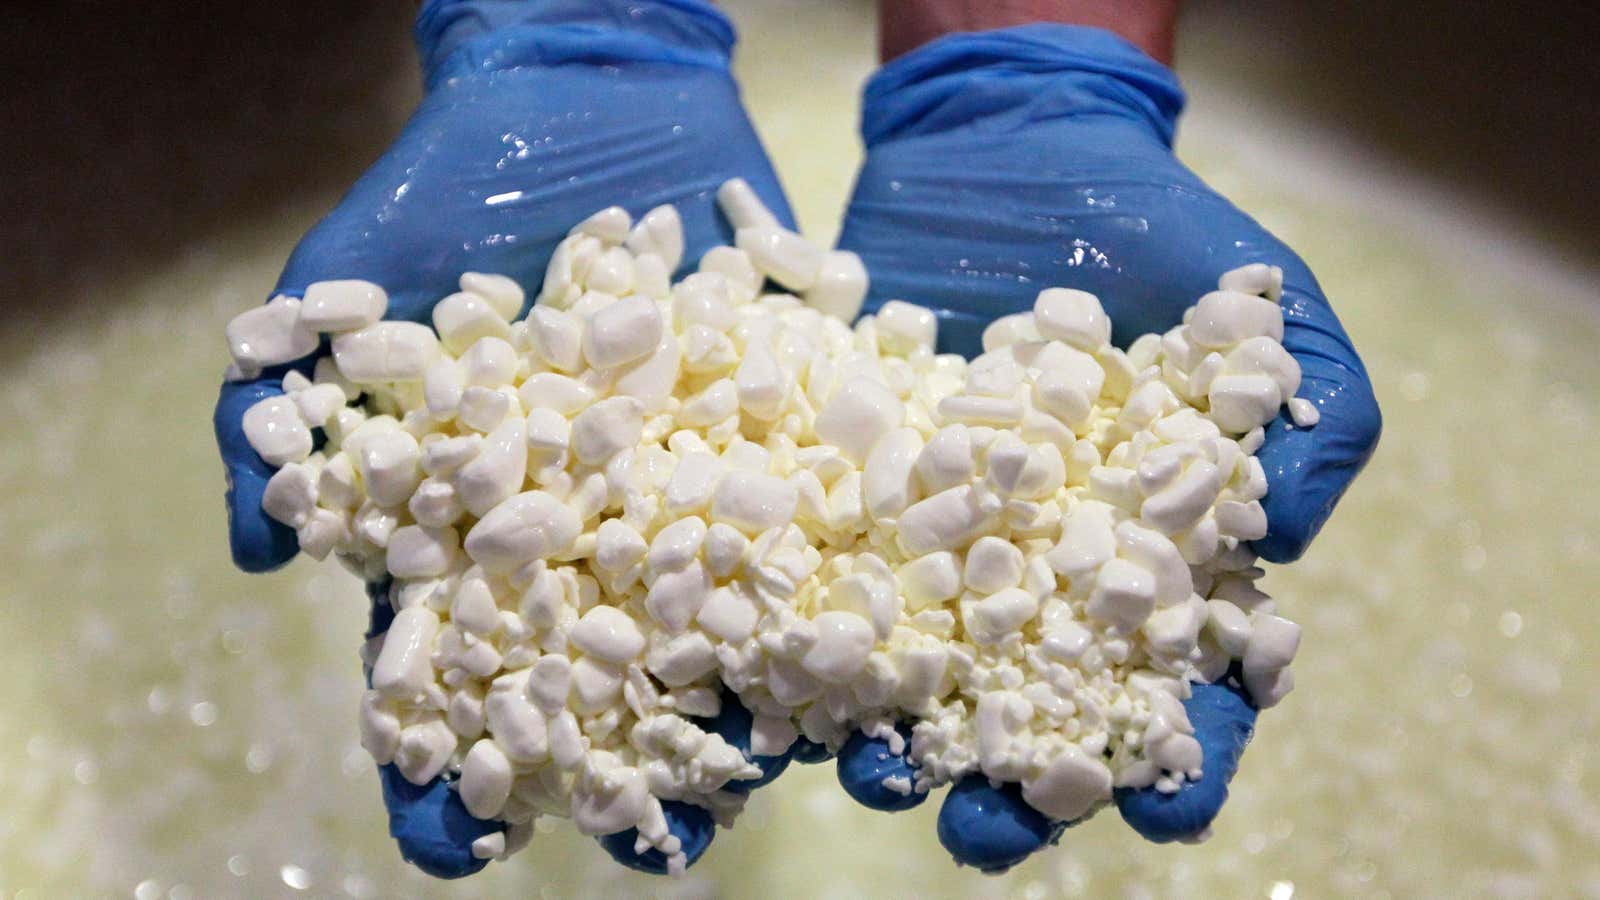 In this June 25, 2012 photo, cheese maker, Britton Comer, checks the curds as he makes a batch of cottage cheese at Traders Point Creamery in Zionsville, Ind. Traders Point is one of the few well known high-end cottage cheese makers, along with Cowgirl Creamery in northern California. (AP Photo/Michael Conroy)